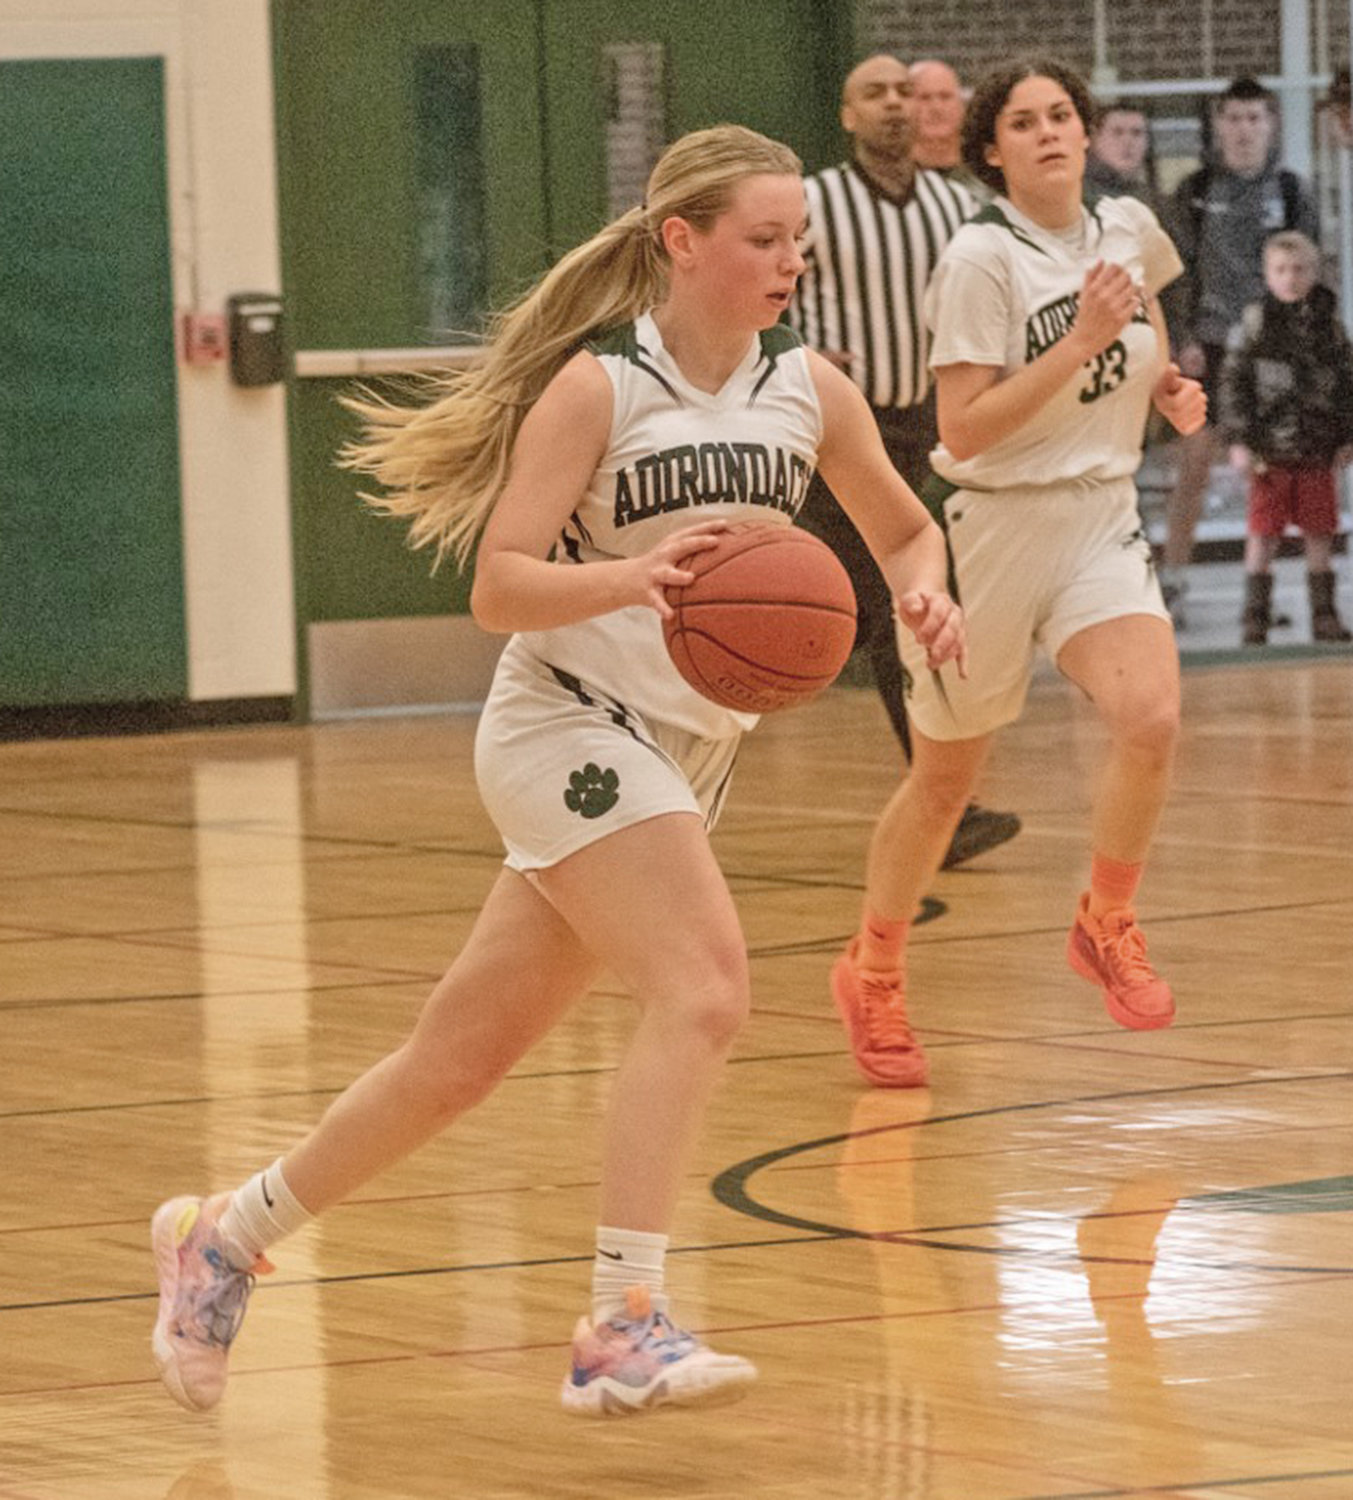 Ireland Payne brings the ball up the court for Adirondack Monday at home against West Canada Valley. At right is teammate Rebeckah Tittle. Tittle led the team with 11 points and Payne had 10 but the Wildcats lost 59-46.